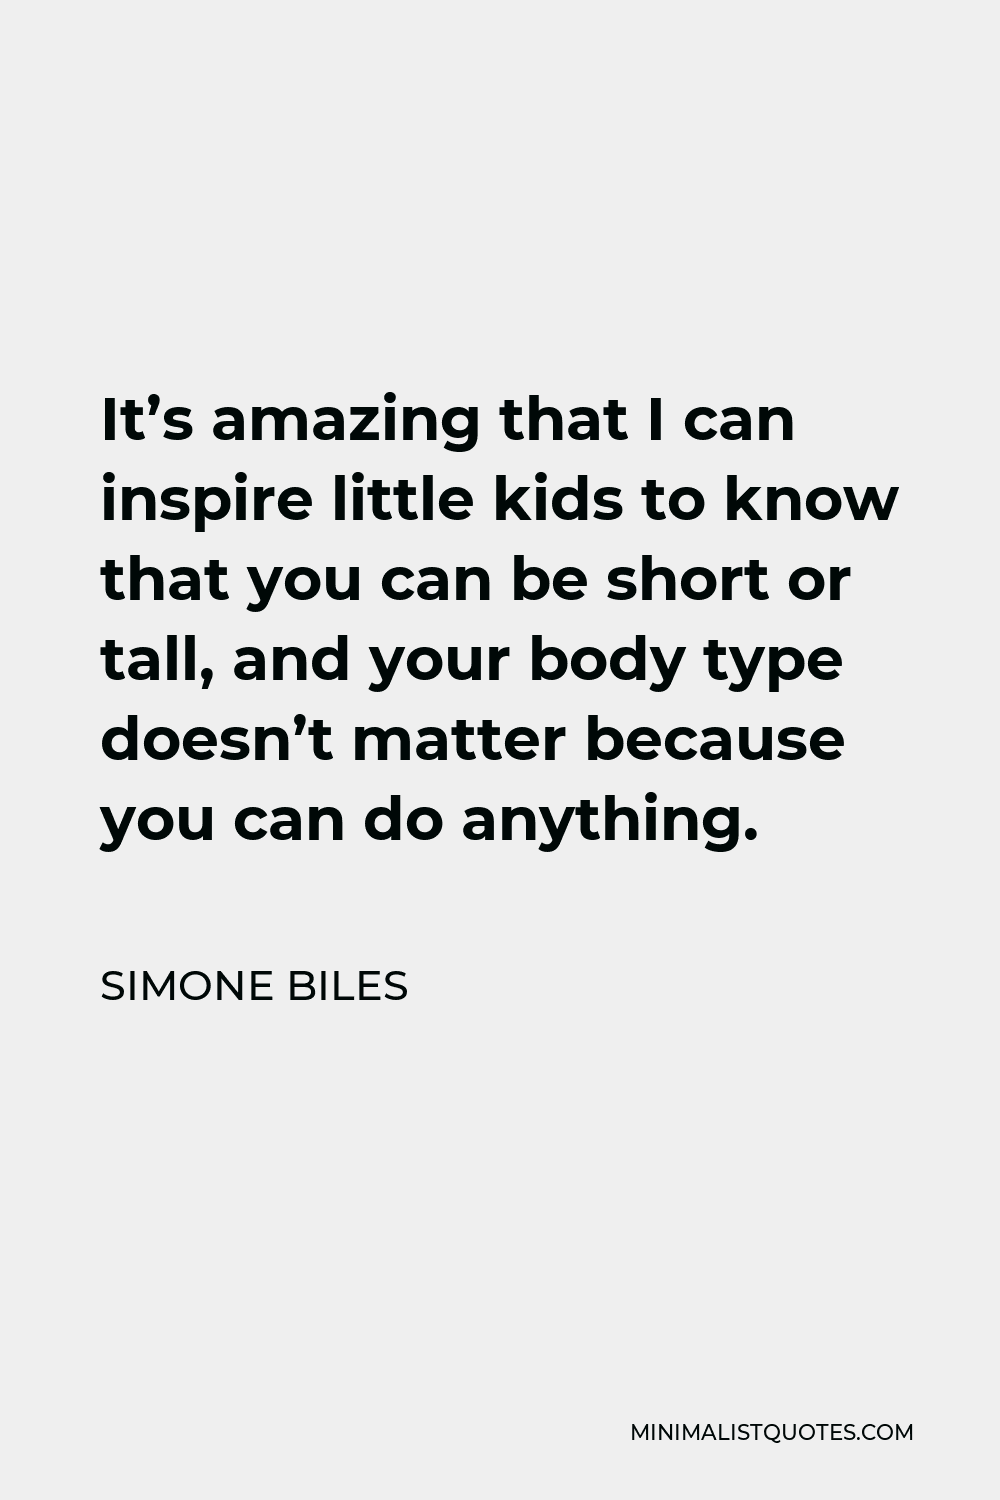 Simone Biles Quote - It’s amazing that I can inspire little kids to know that you can be short or tall, and your body type doesn’t matter because you can do anything.